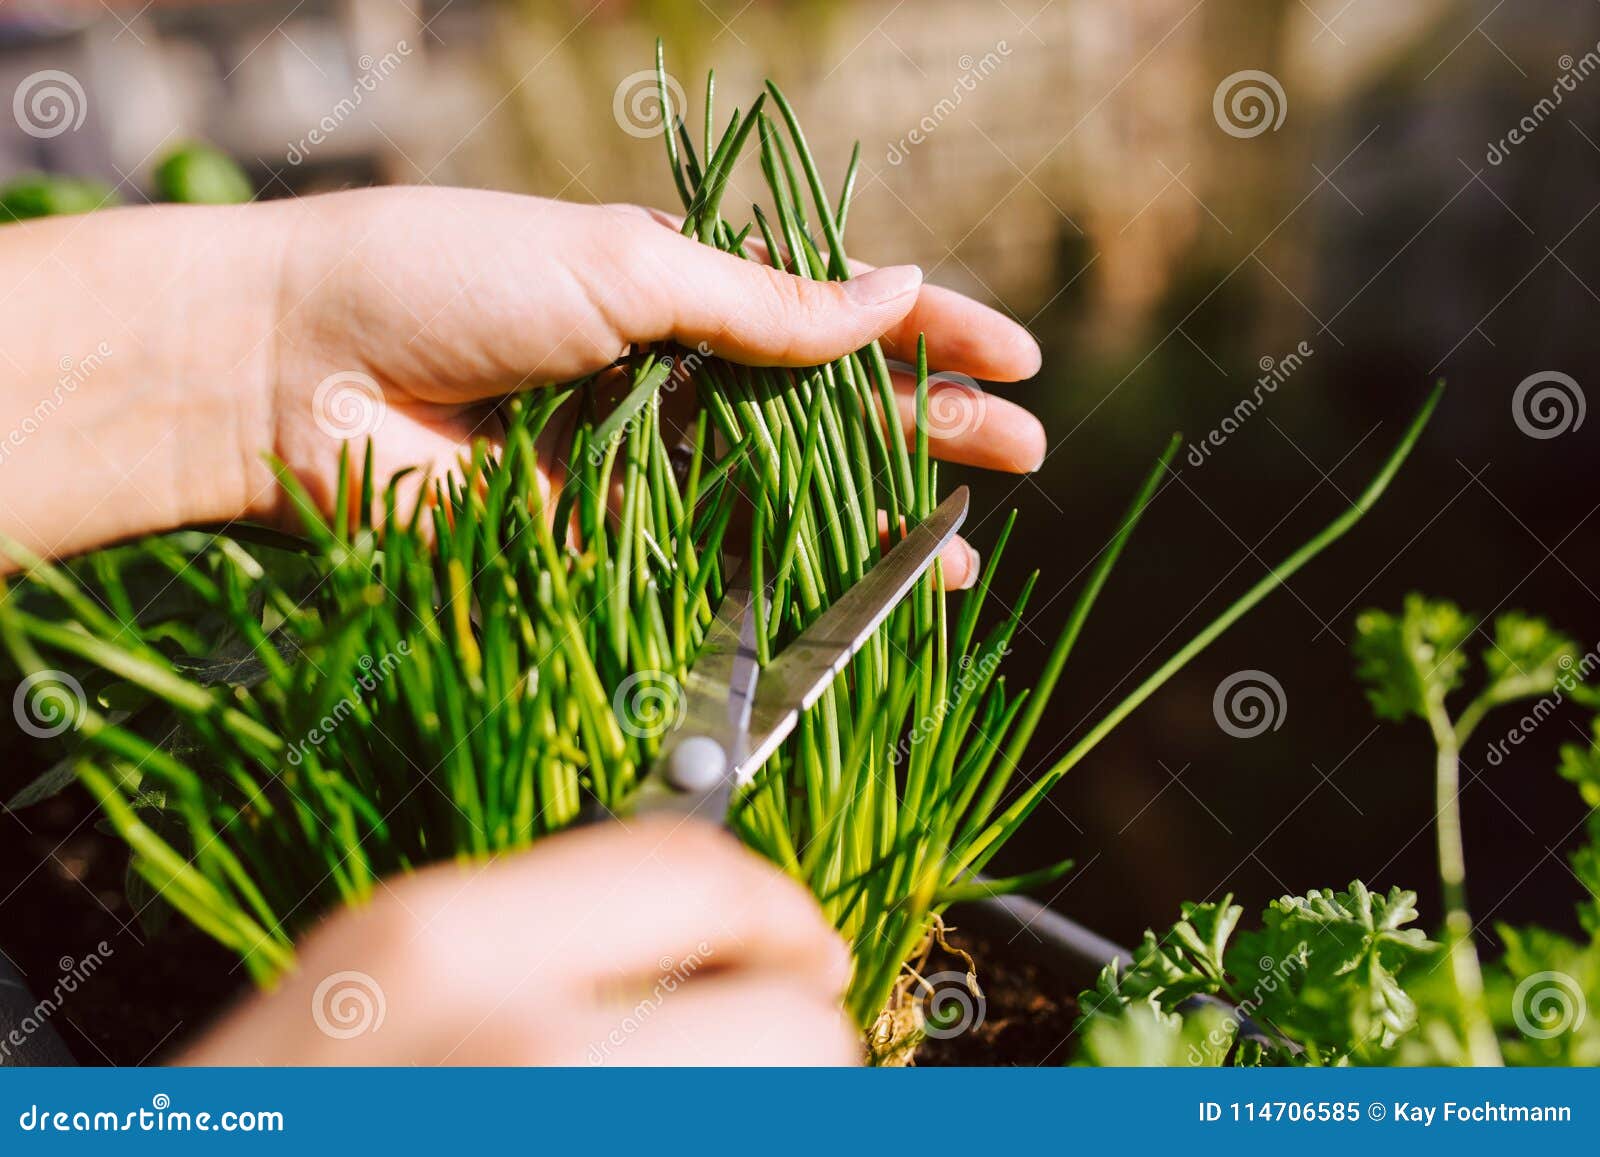 young woman gardening and cutting fresh chives with scissors